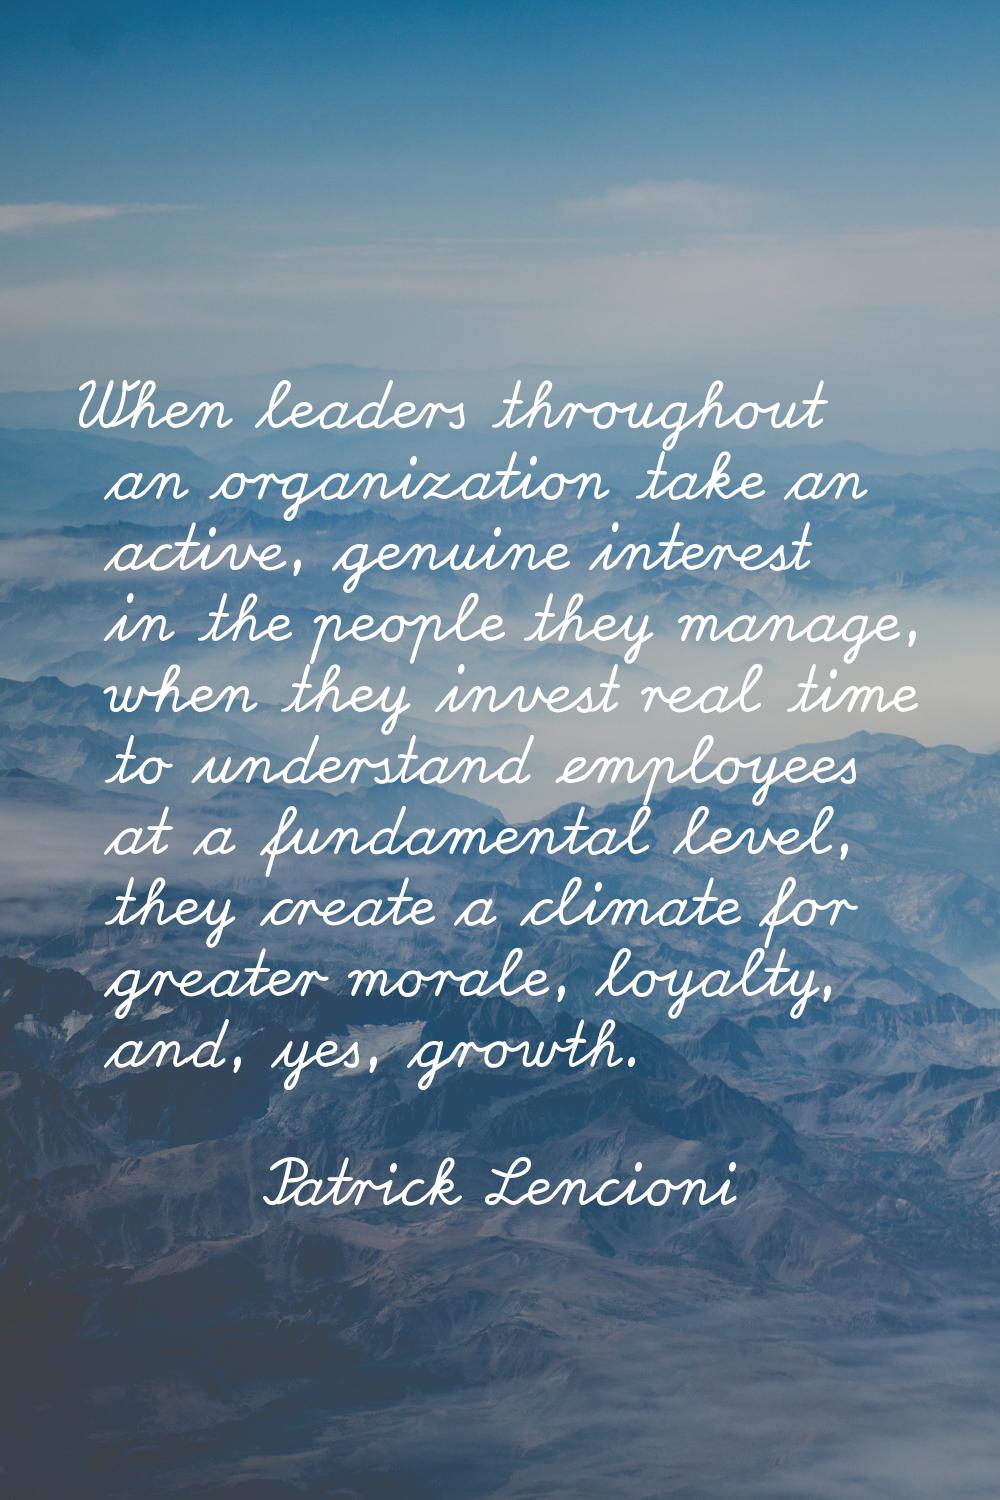 When leaders throughout an organization take an active, genuine interest in the people they manage,